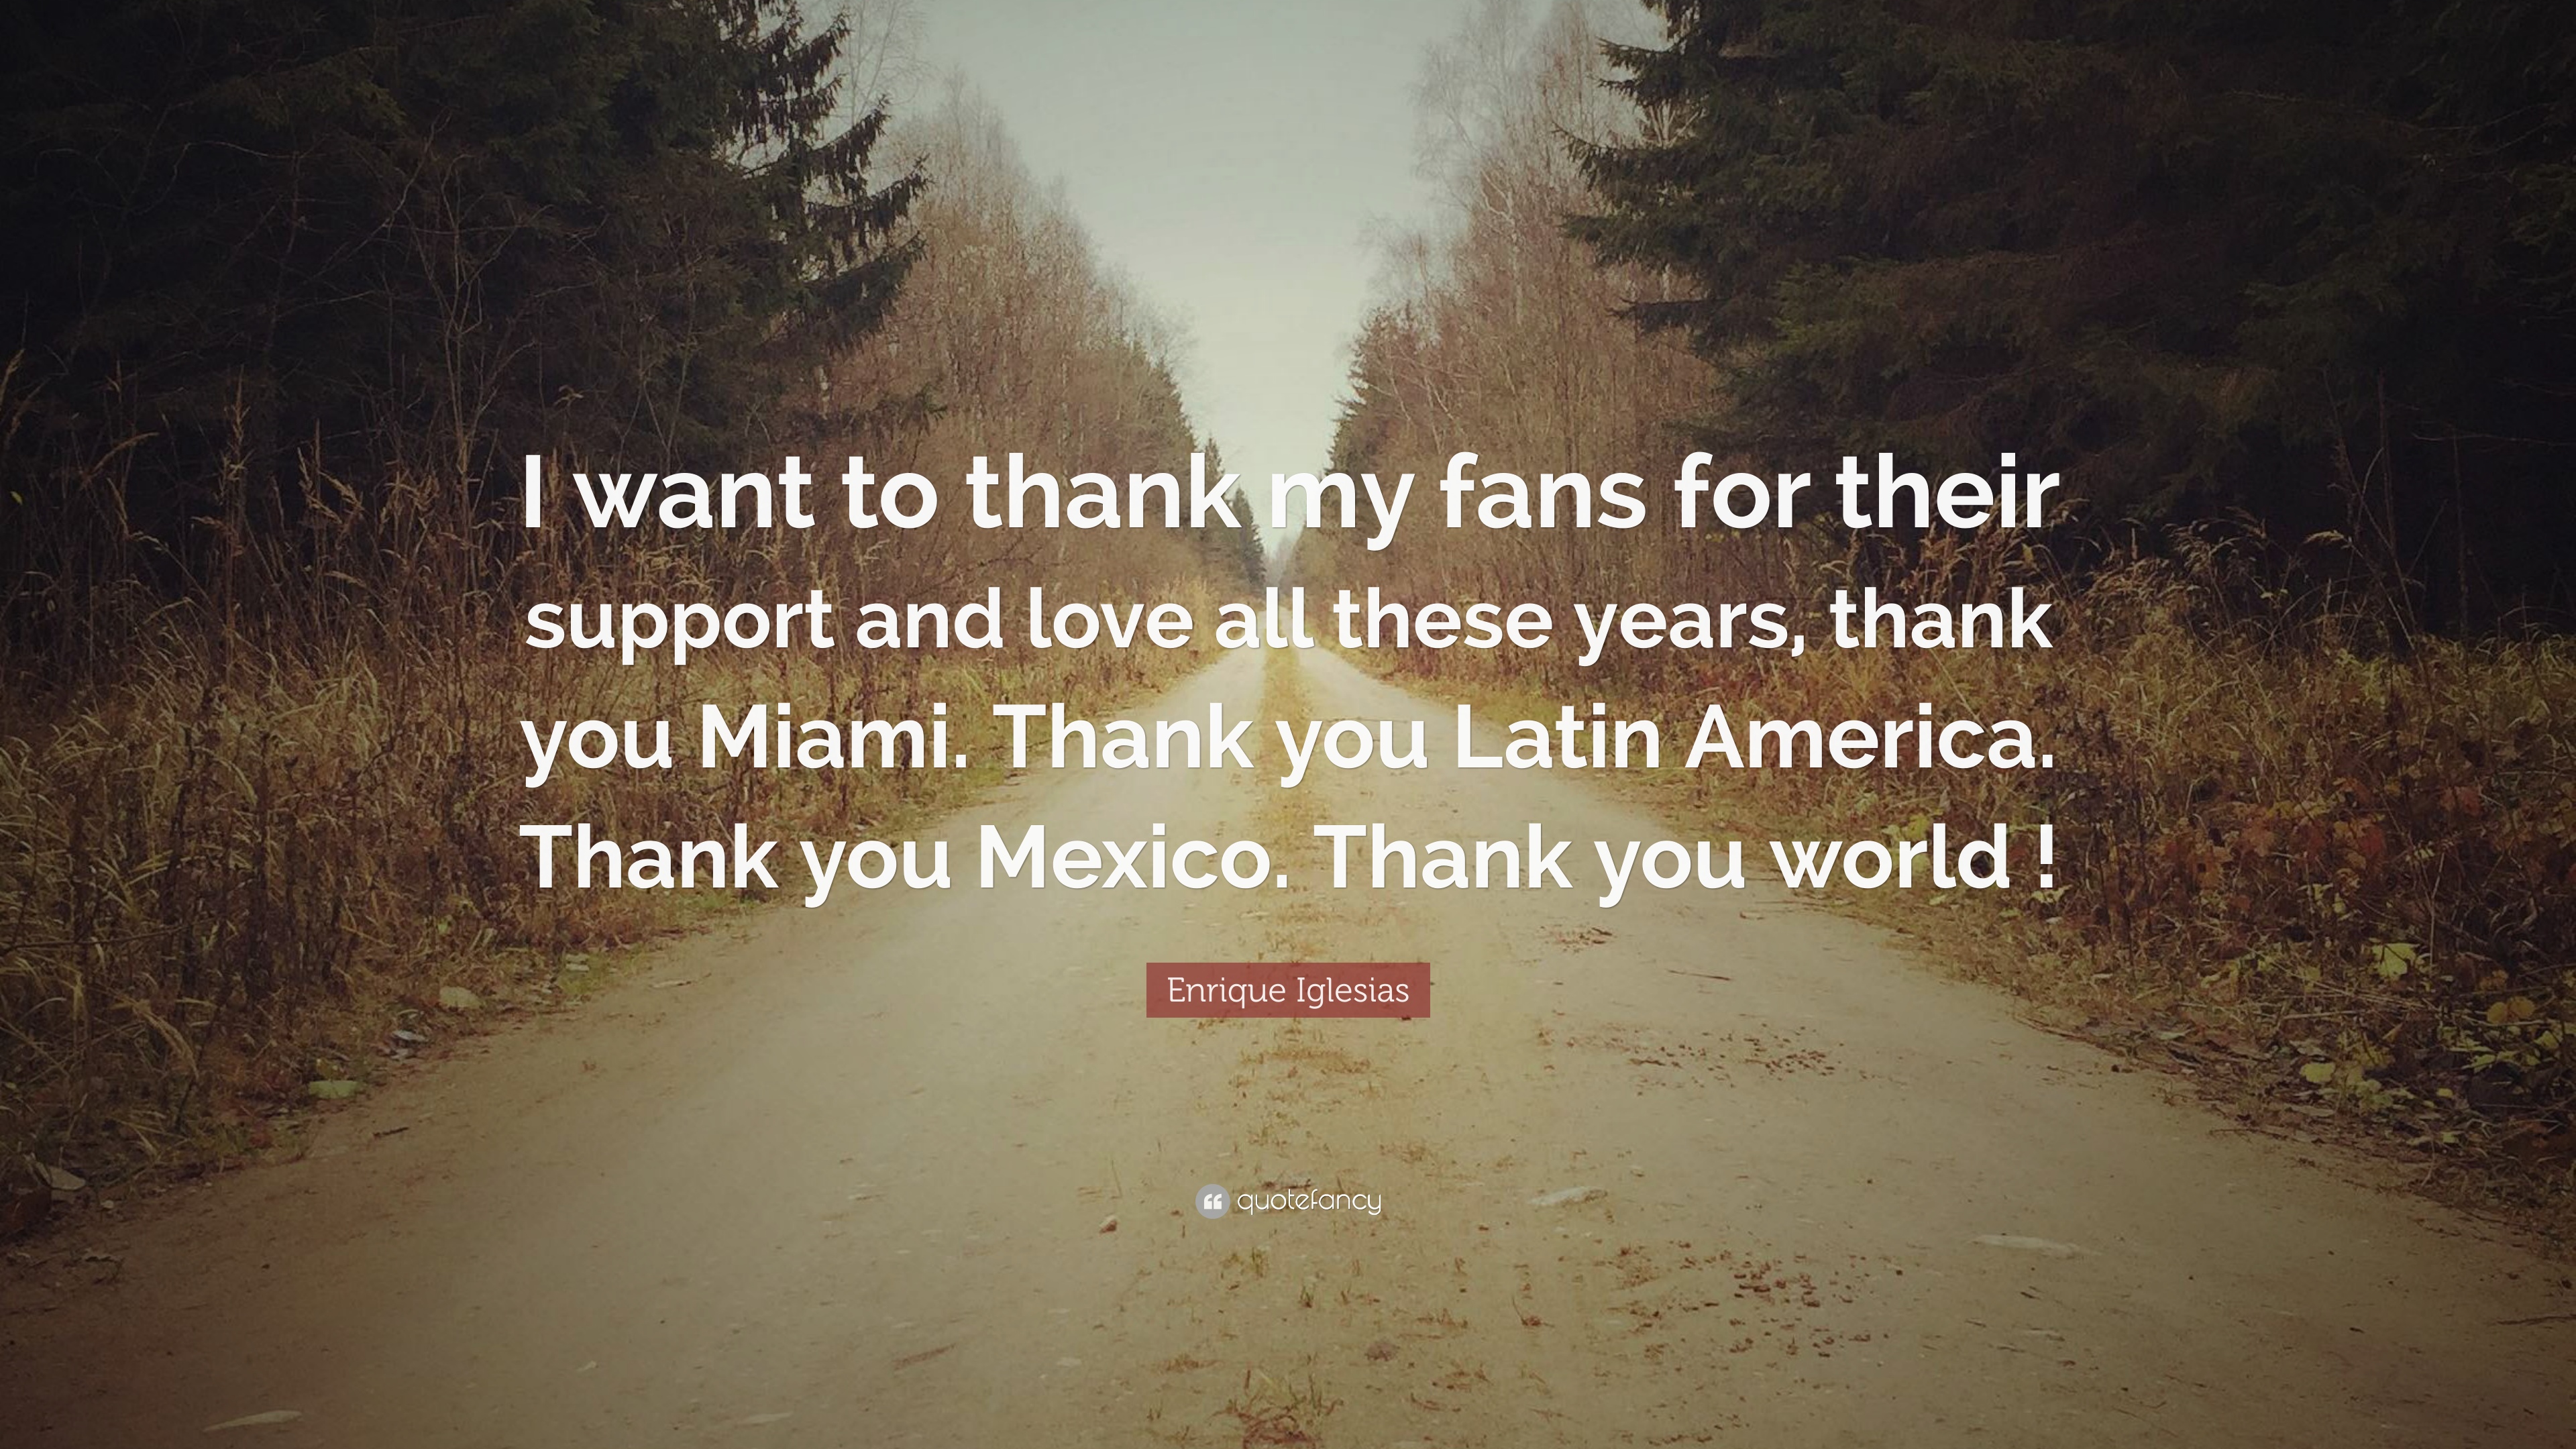 Enrique Iglesias Quote: “I want to thank my fans for their support and love all these years, thank you Miami. Thank you Latin America. Thank you .”